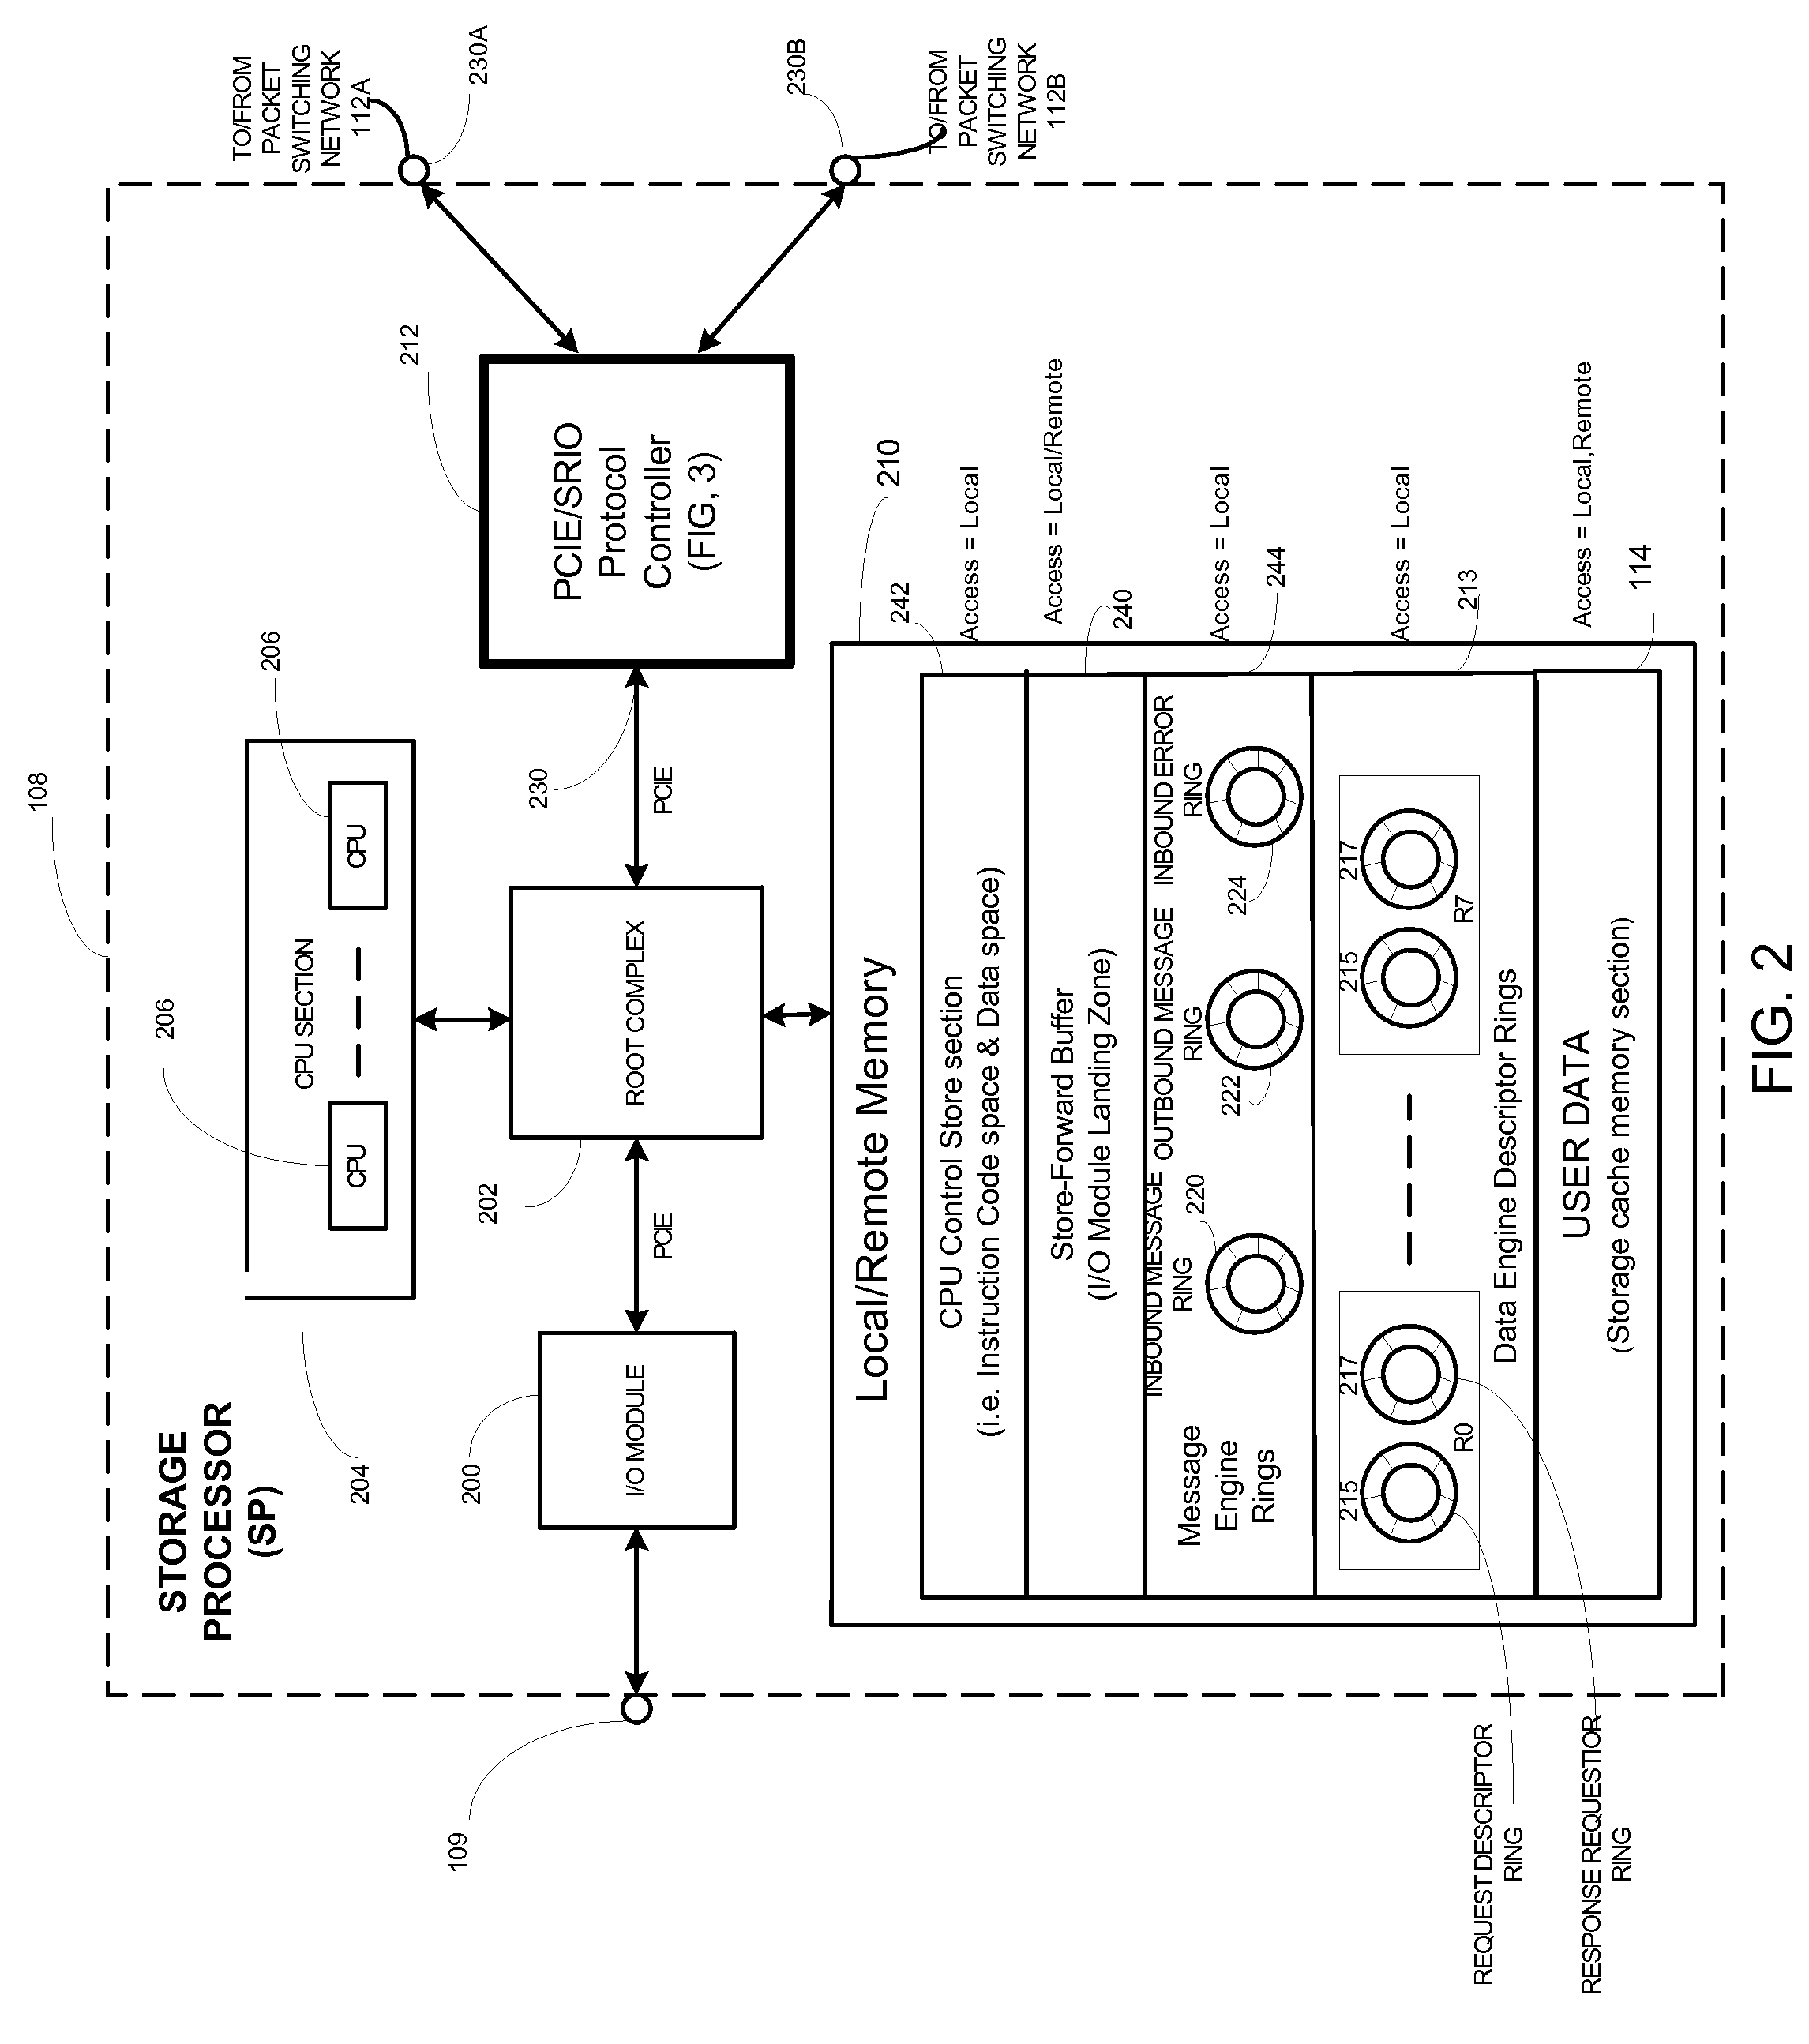 Protocol controller for a data storage system